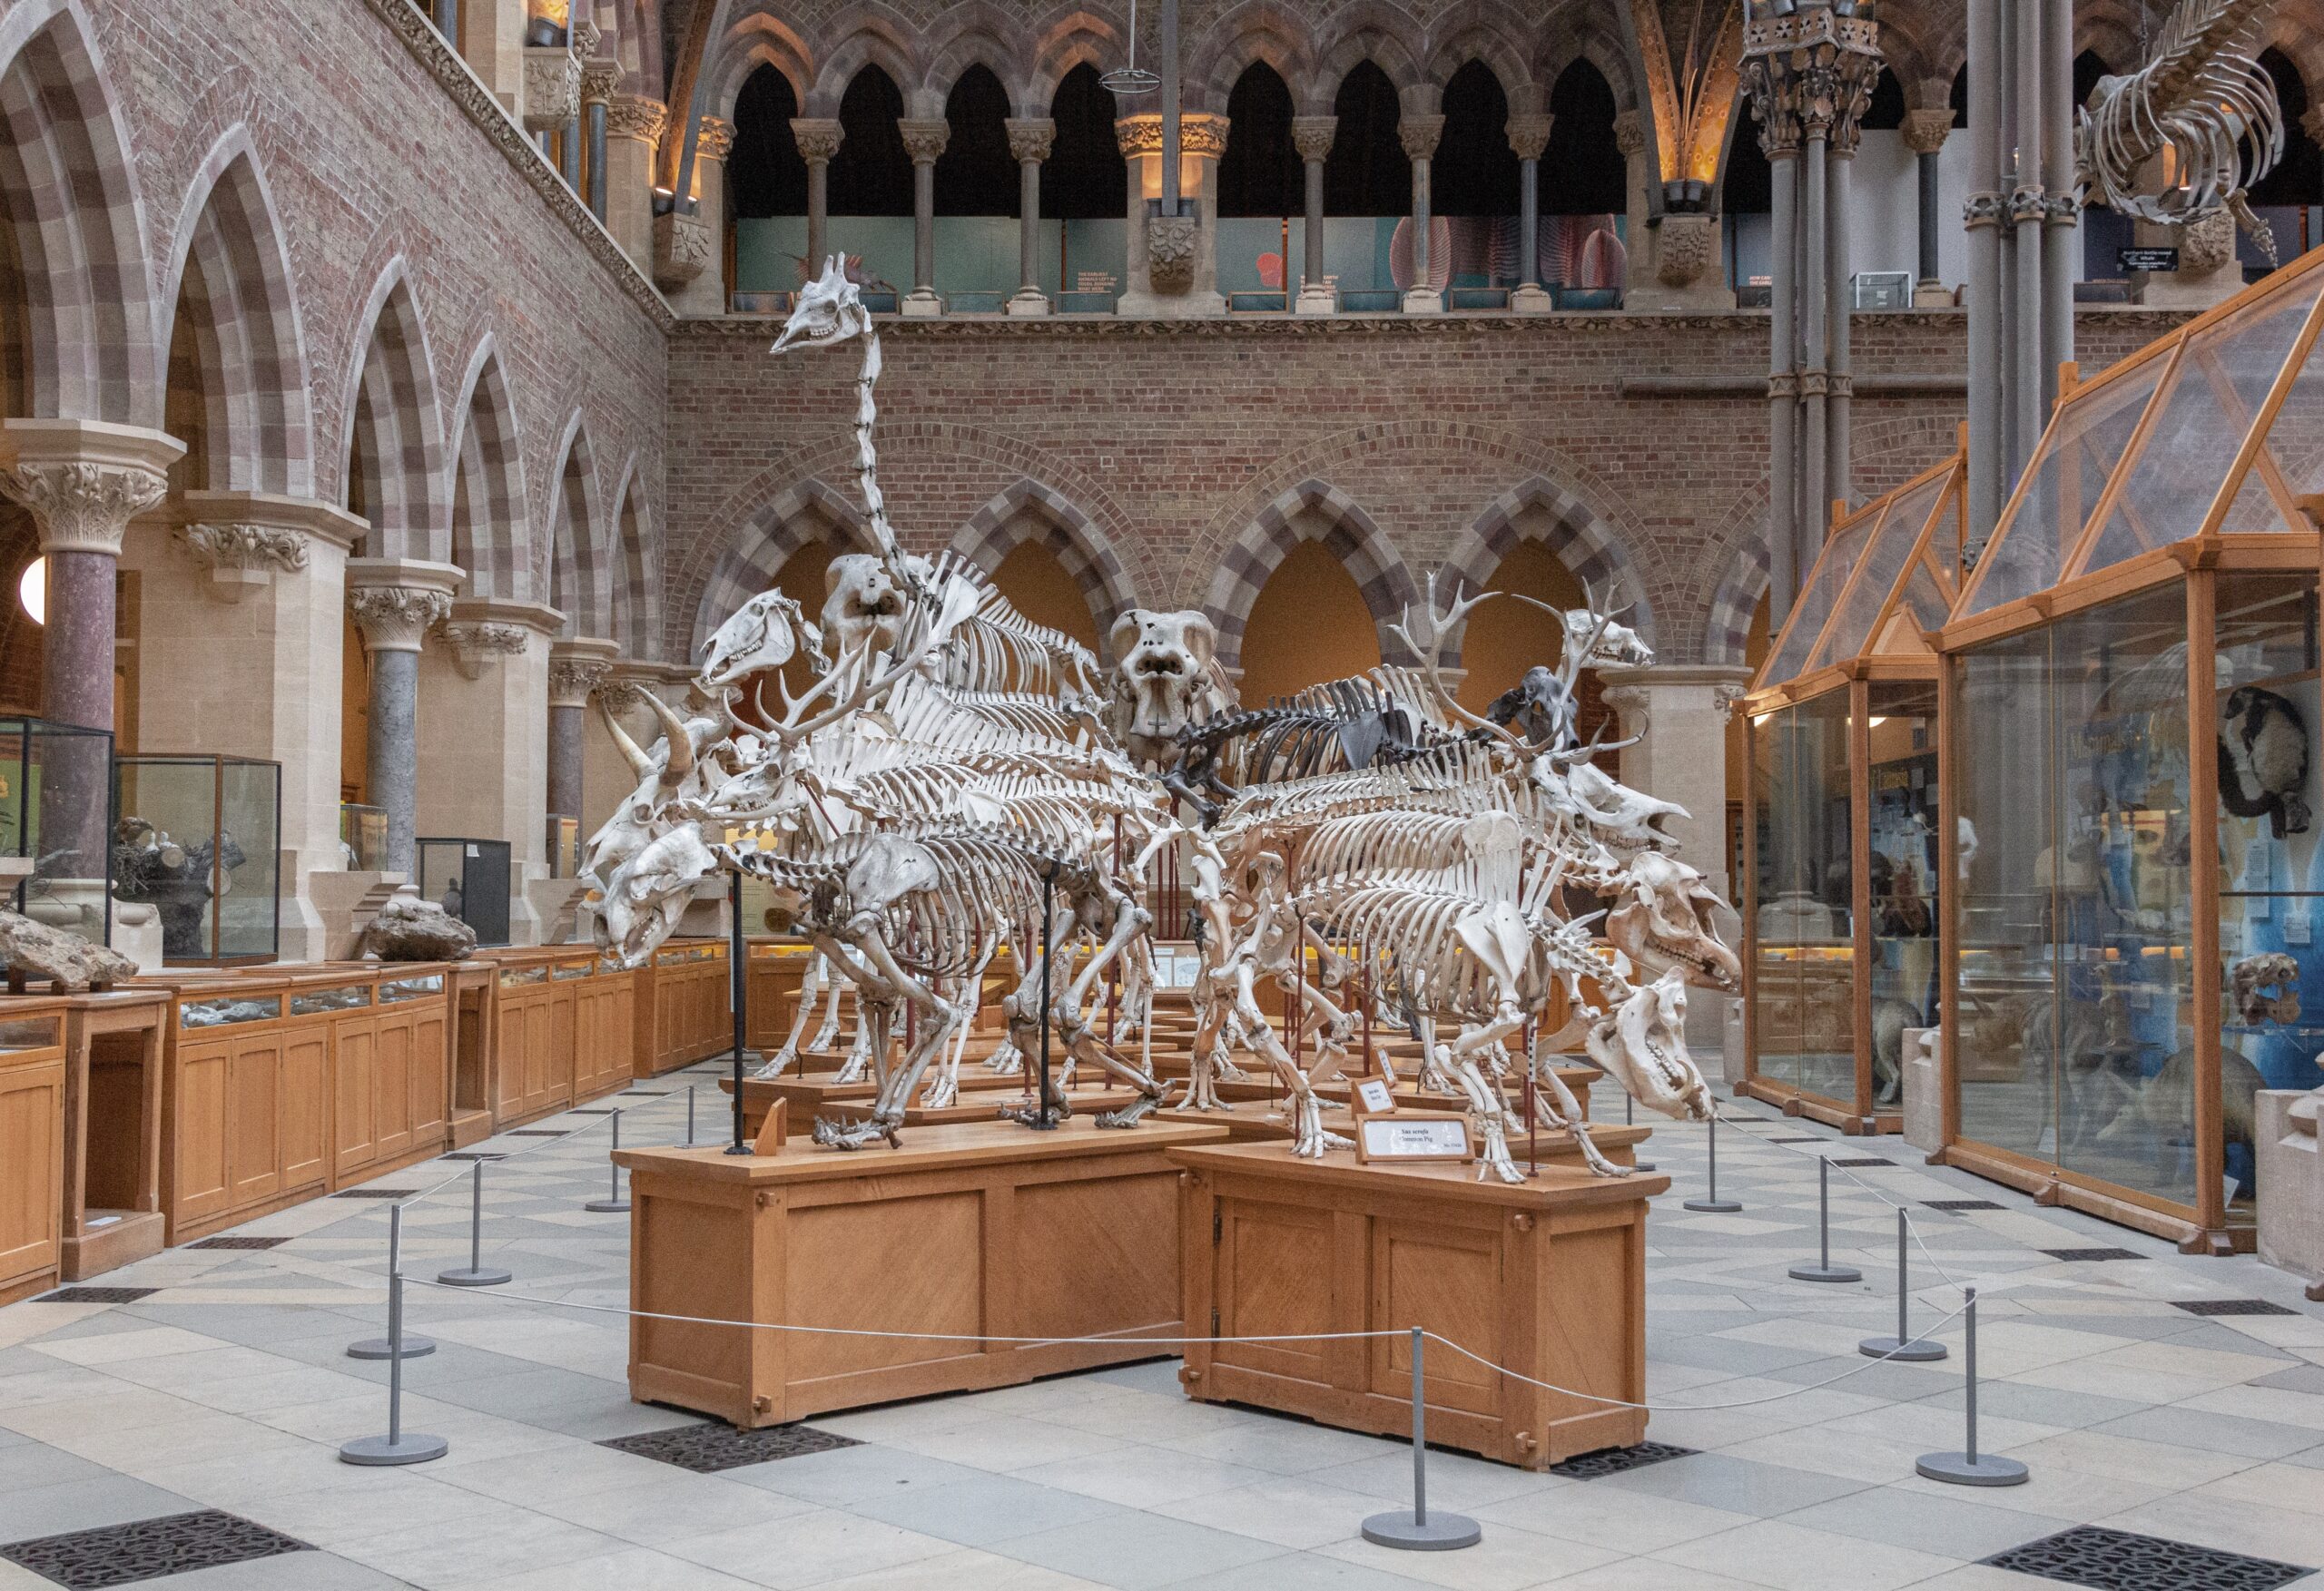 The Oxford Museum of Natural History is an incredible attraction for tourists to visit. Due to its closeness to Oxford University, it is a great last stop for those coming from London.
pictured: the interior of the Museum of Natural History in Oxford, with dinosaur skeletons on display 